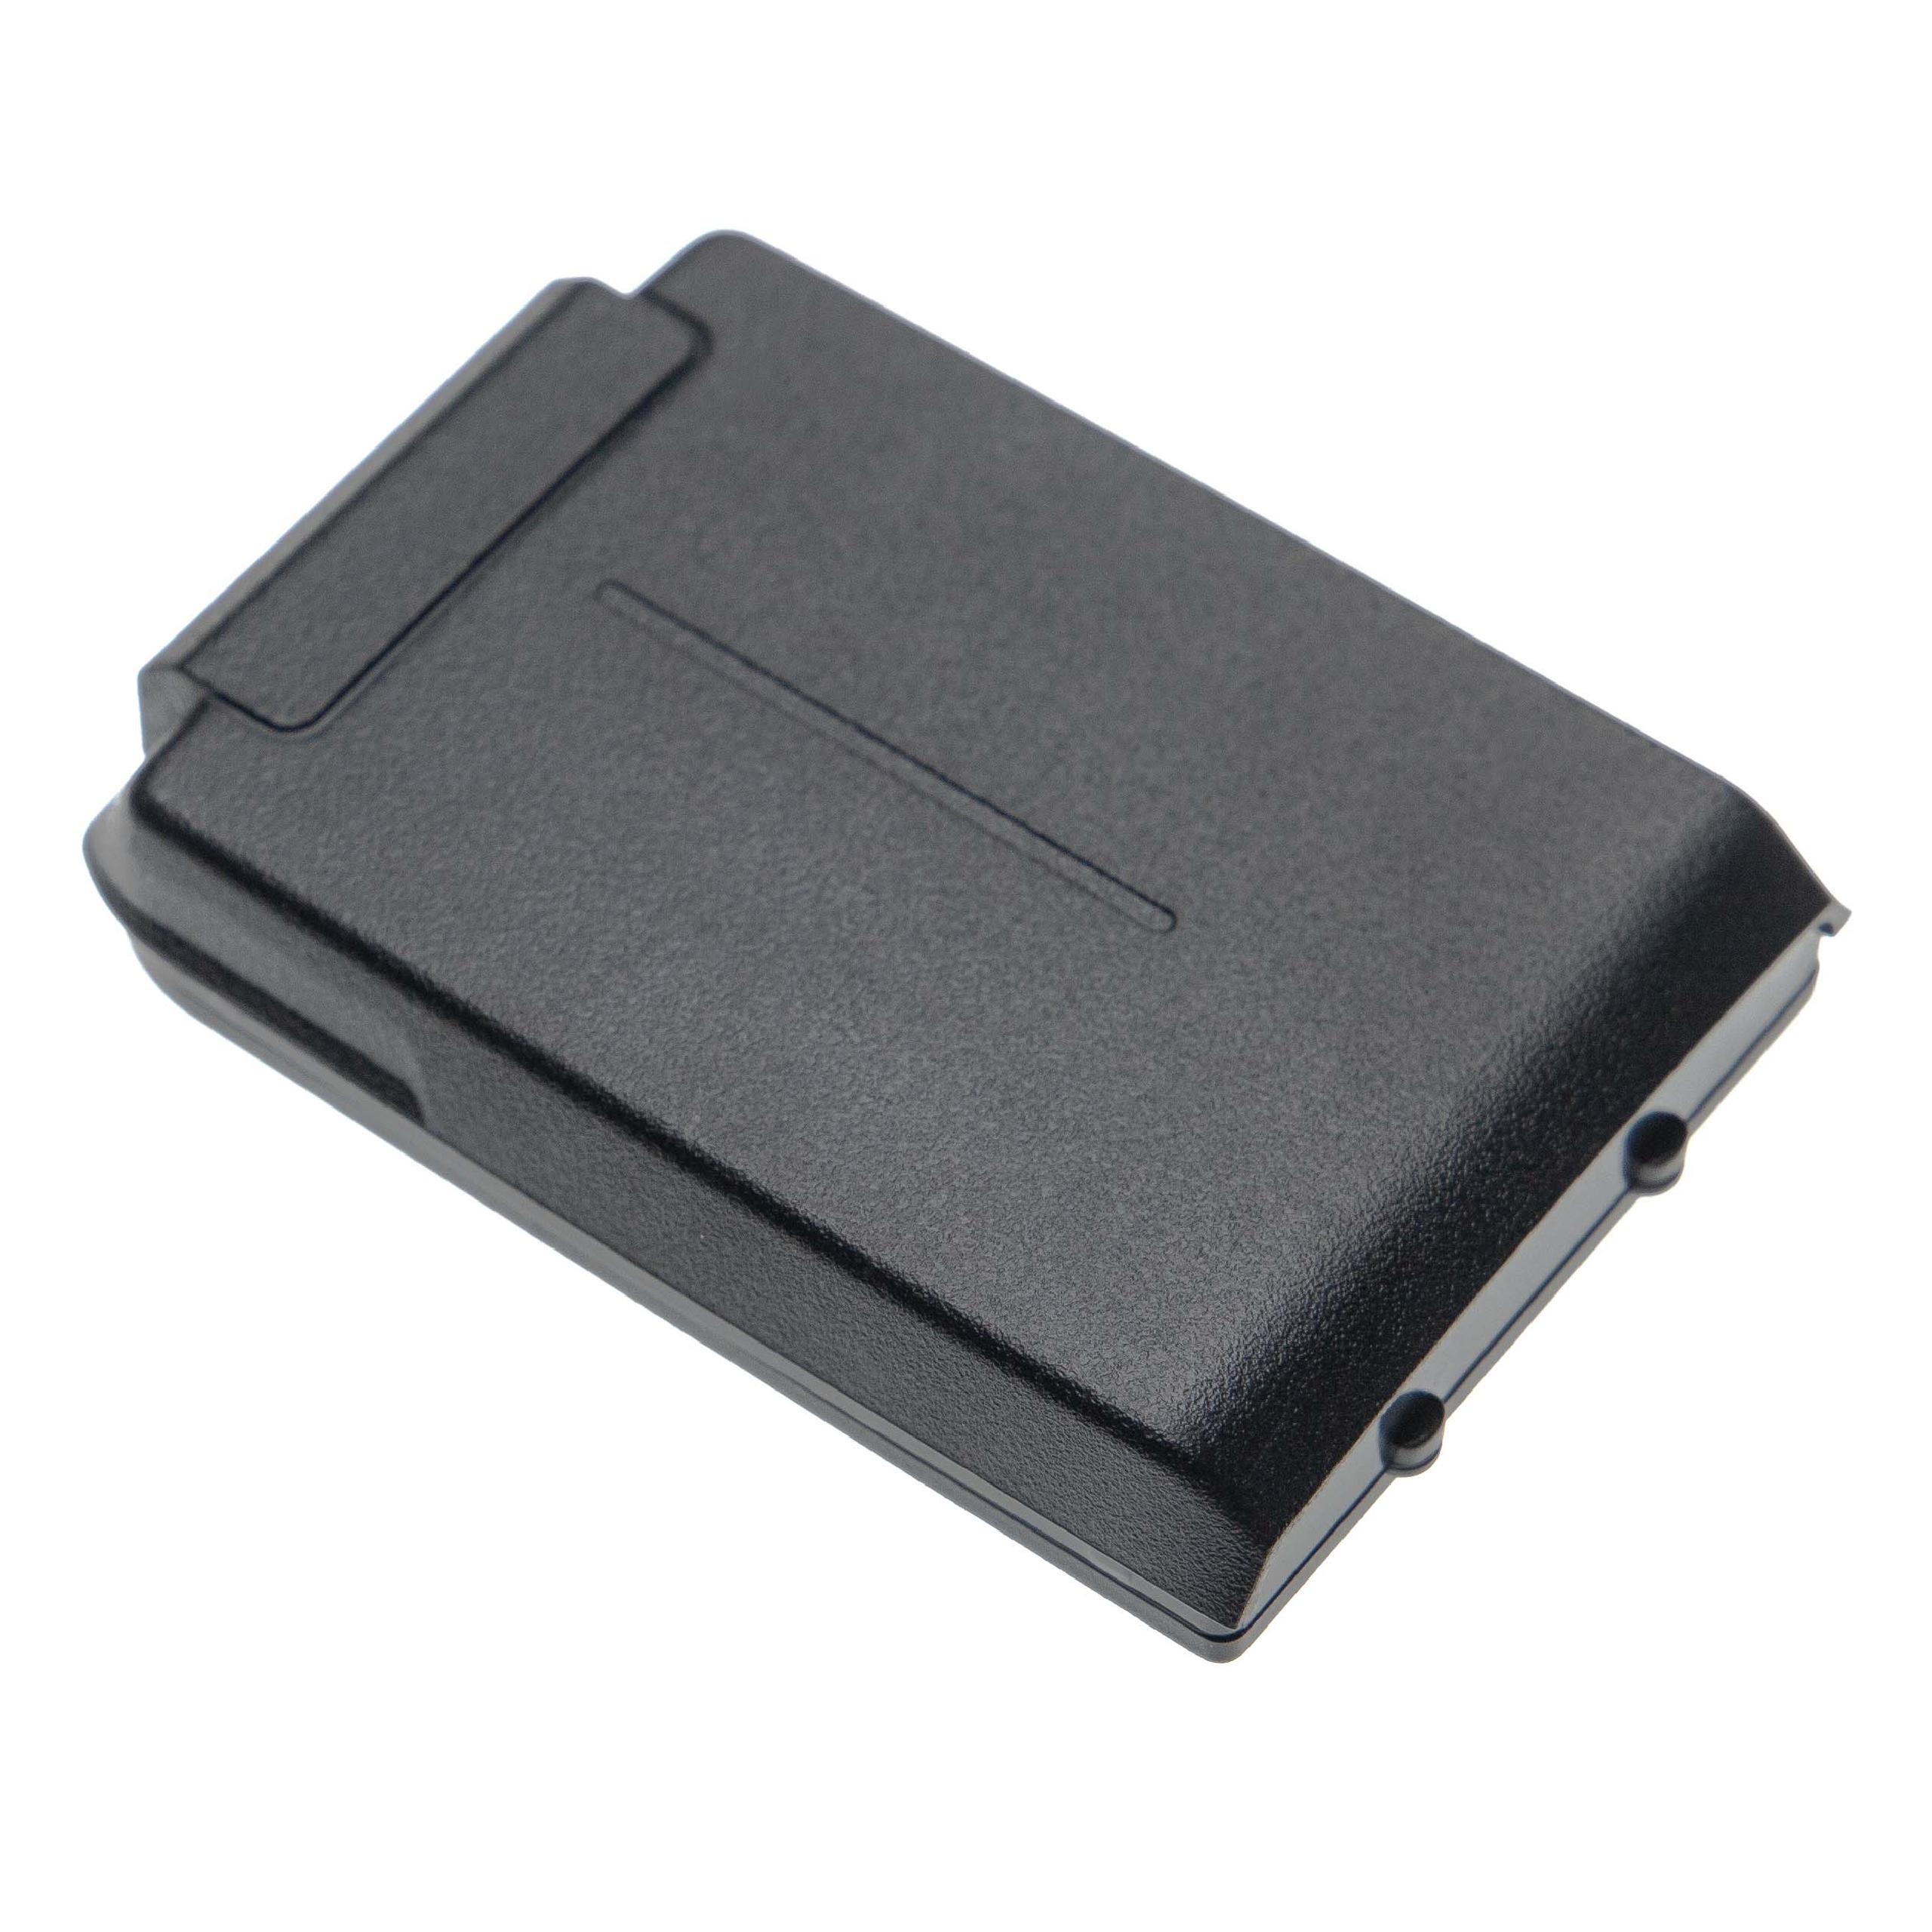 Radio Battery Replacement for HYT BL1809, BL1401 - 1400mAh 7.4V Li-Ion